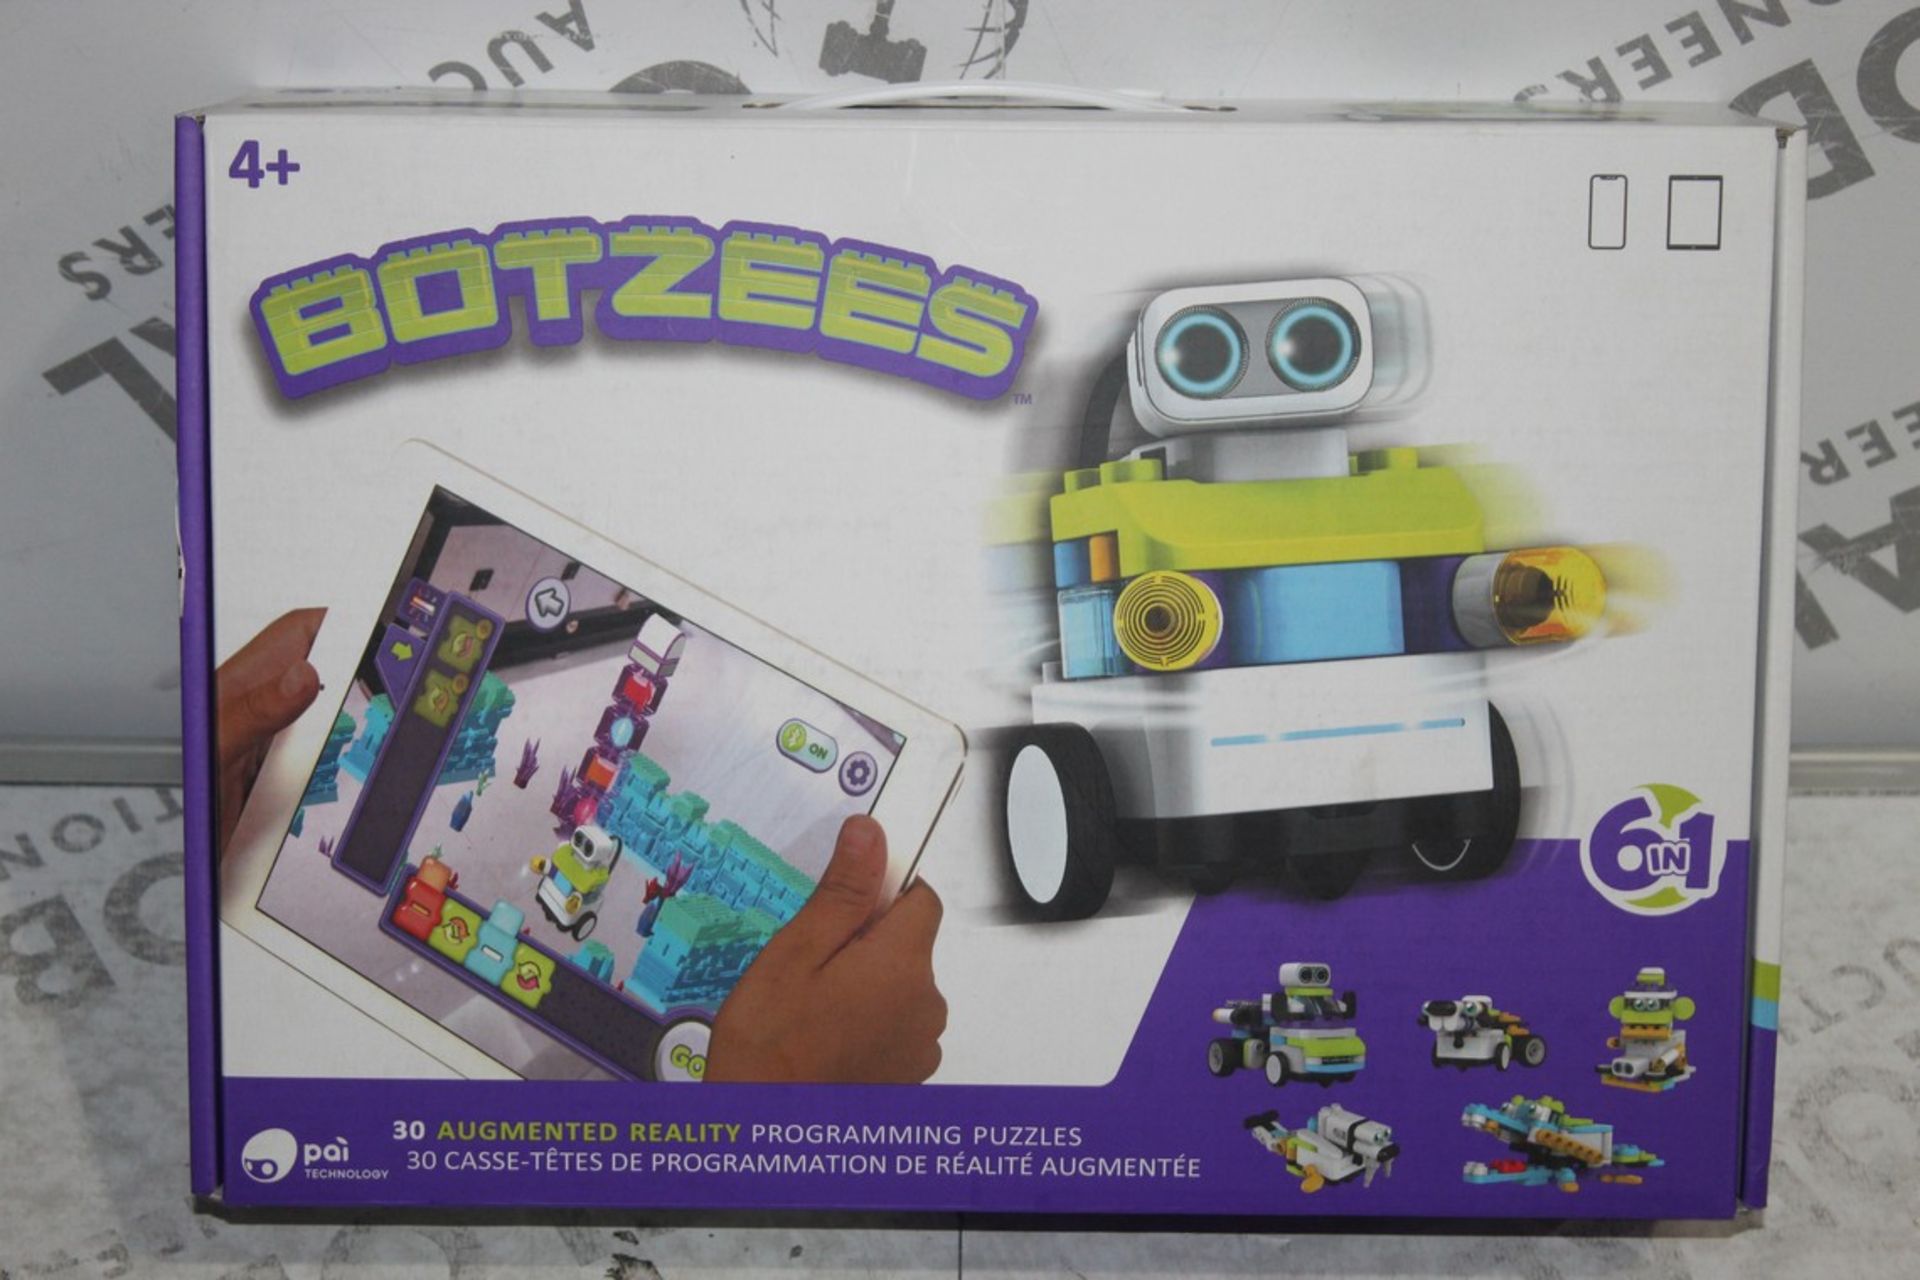 Boxed Botzees Augmented Reality Programmable Puzzles Educational Games RRP £105